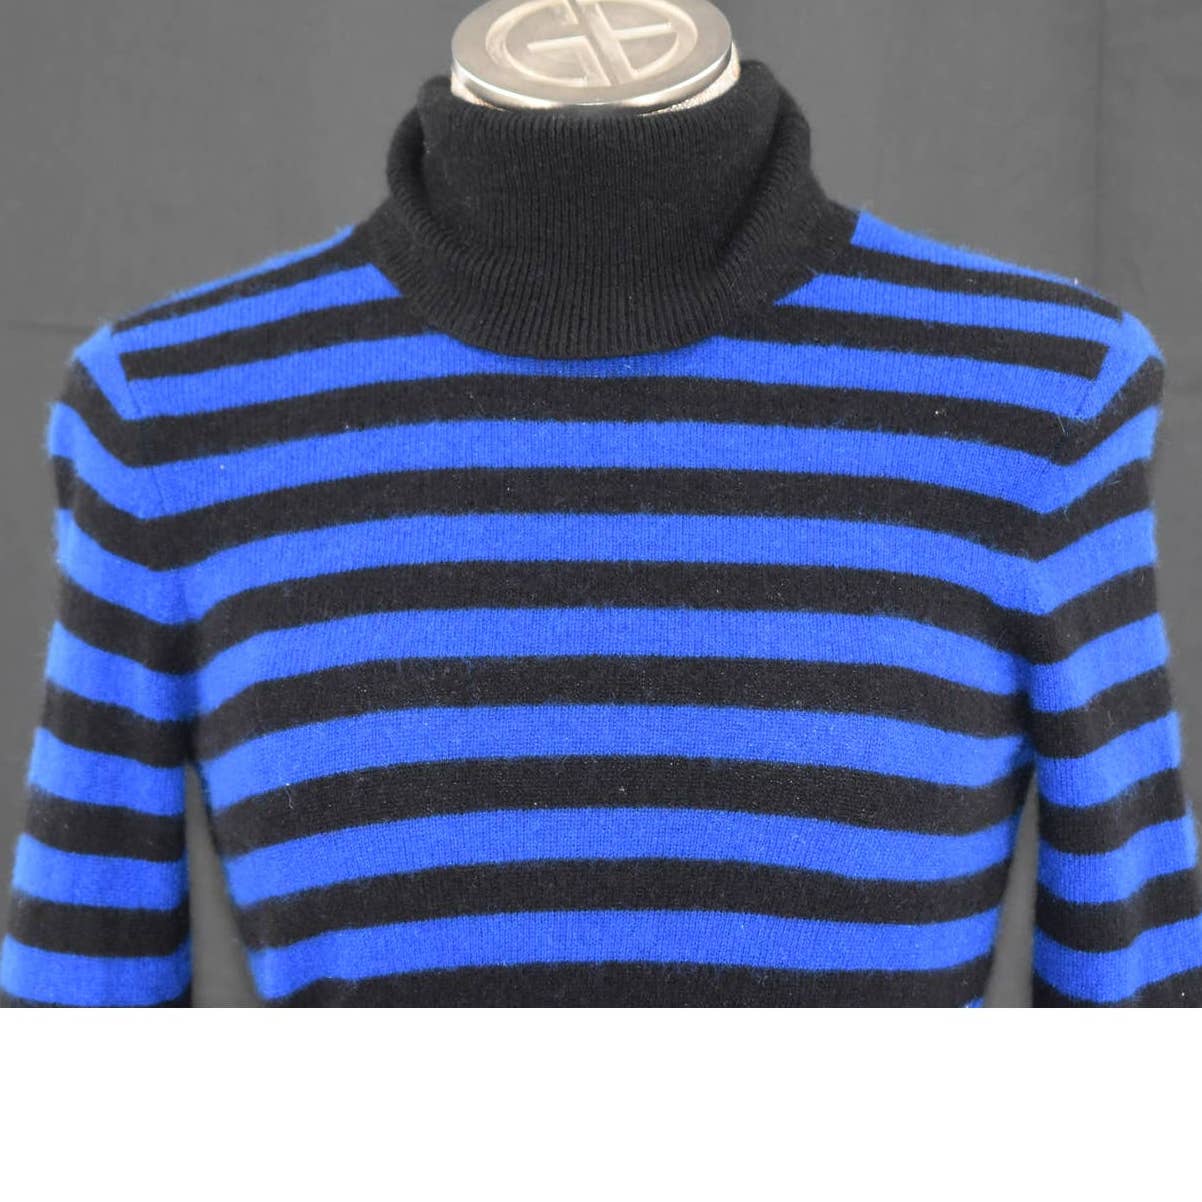 Bloomingdale's Cashmere Black and Blue Striped Turtle Neck Sweater - M